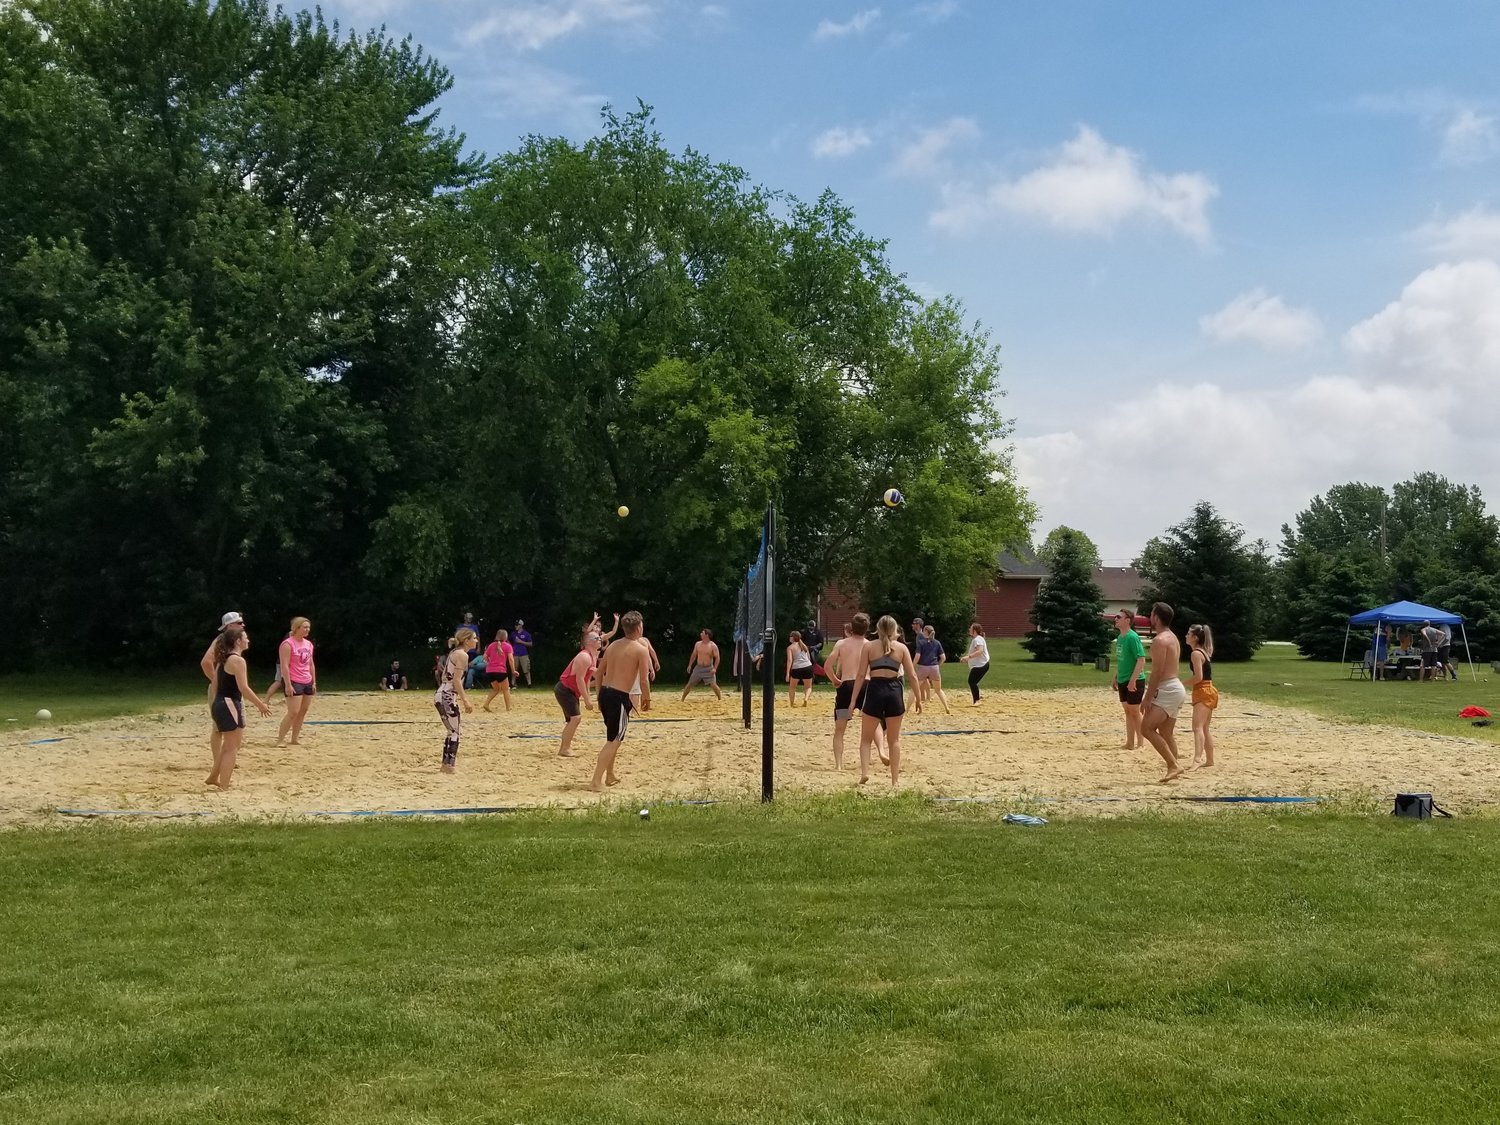 Sand volleyball was among the popular Volksfest outdoor activities Saturday afternoon, June 11th.